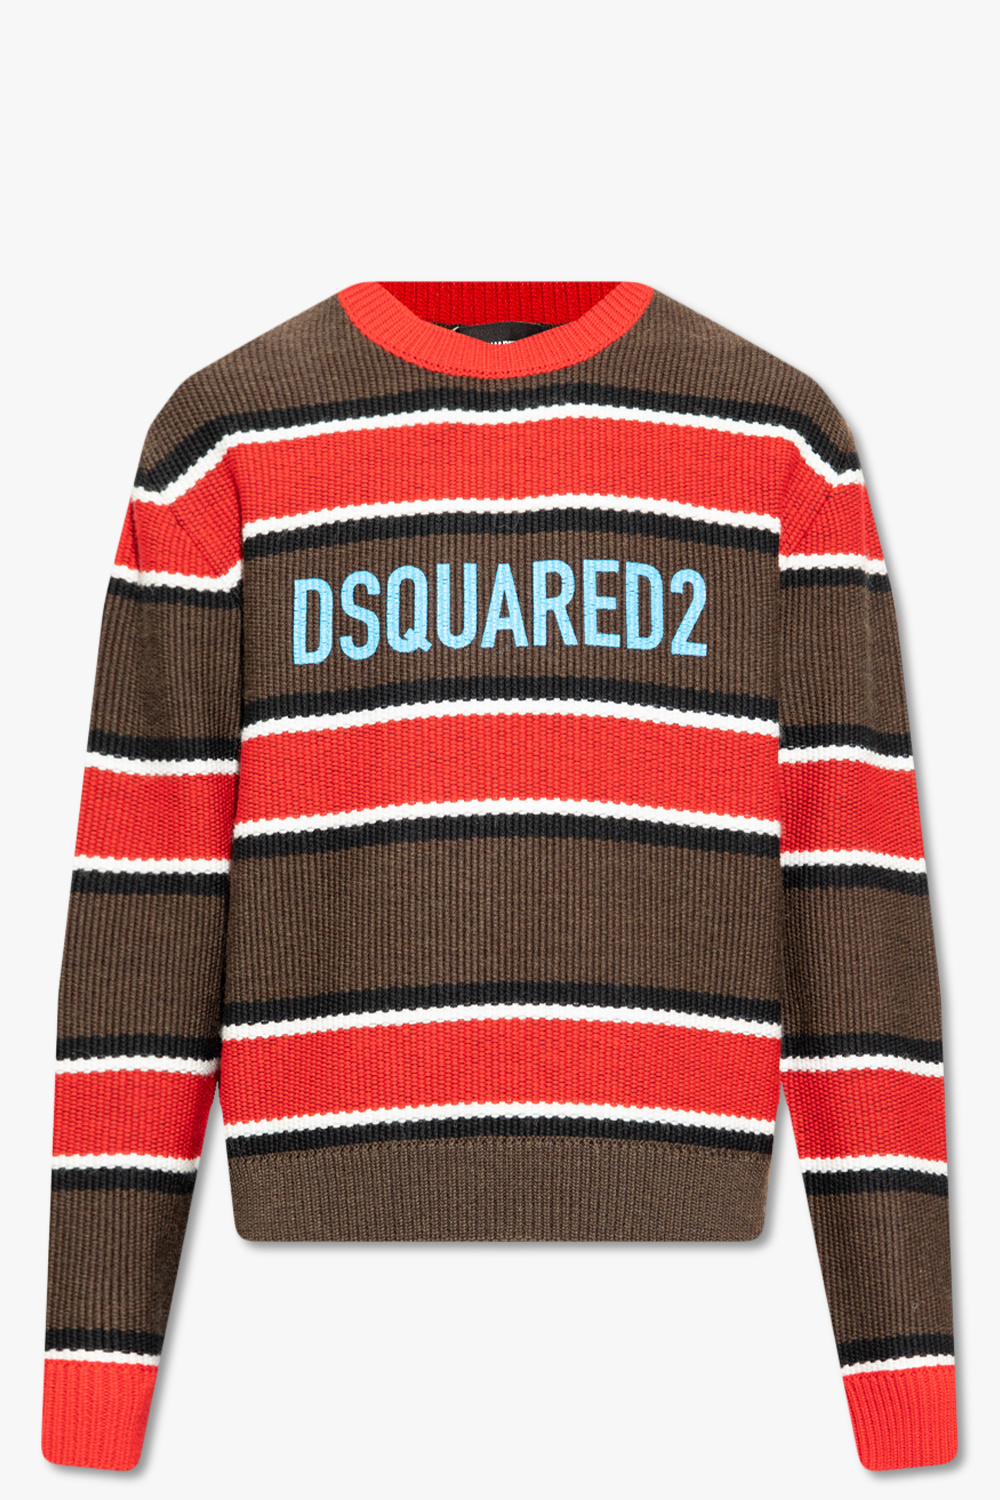 Dsquared2 Hello My Name Is cotton shirt